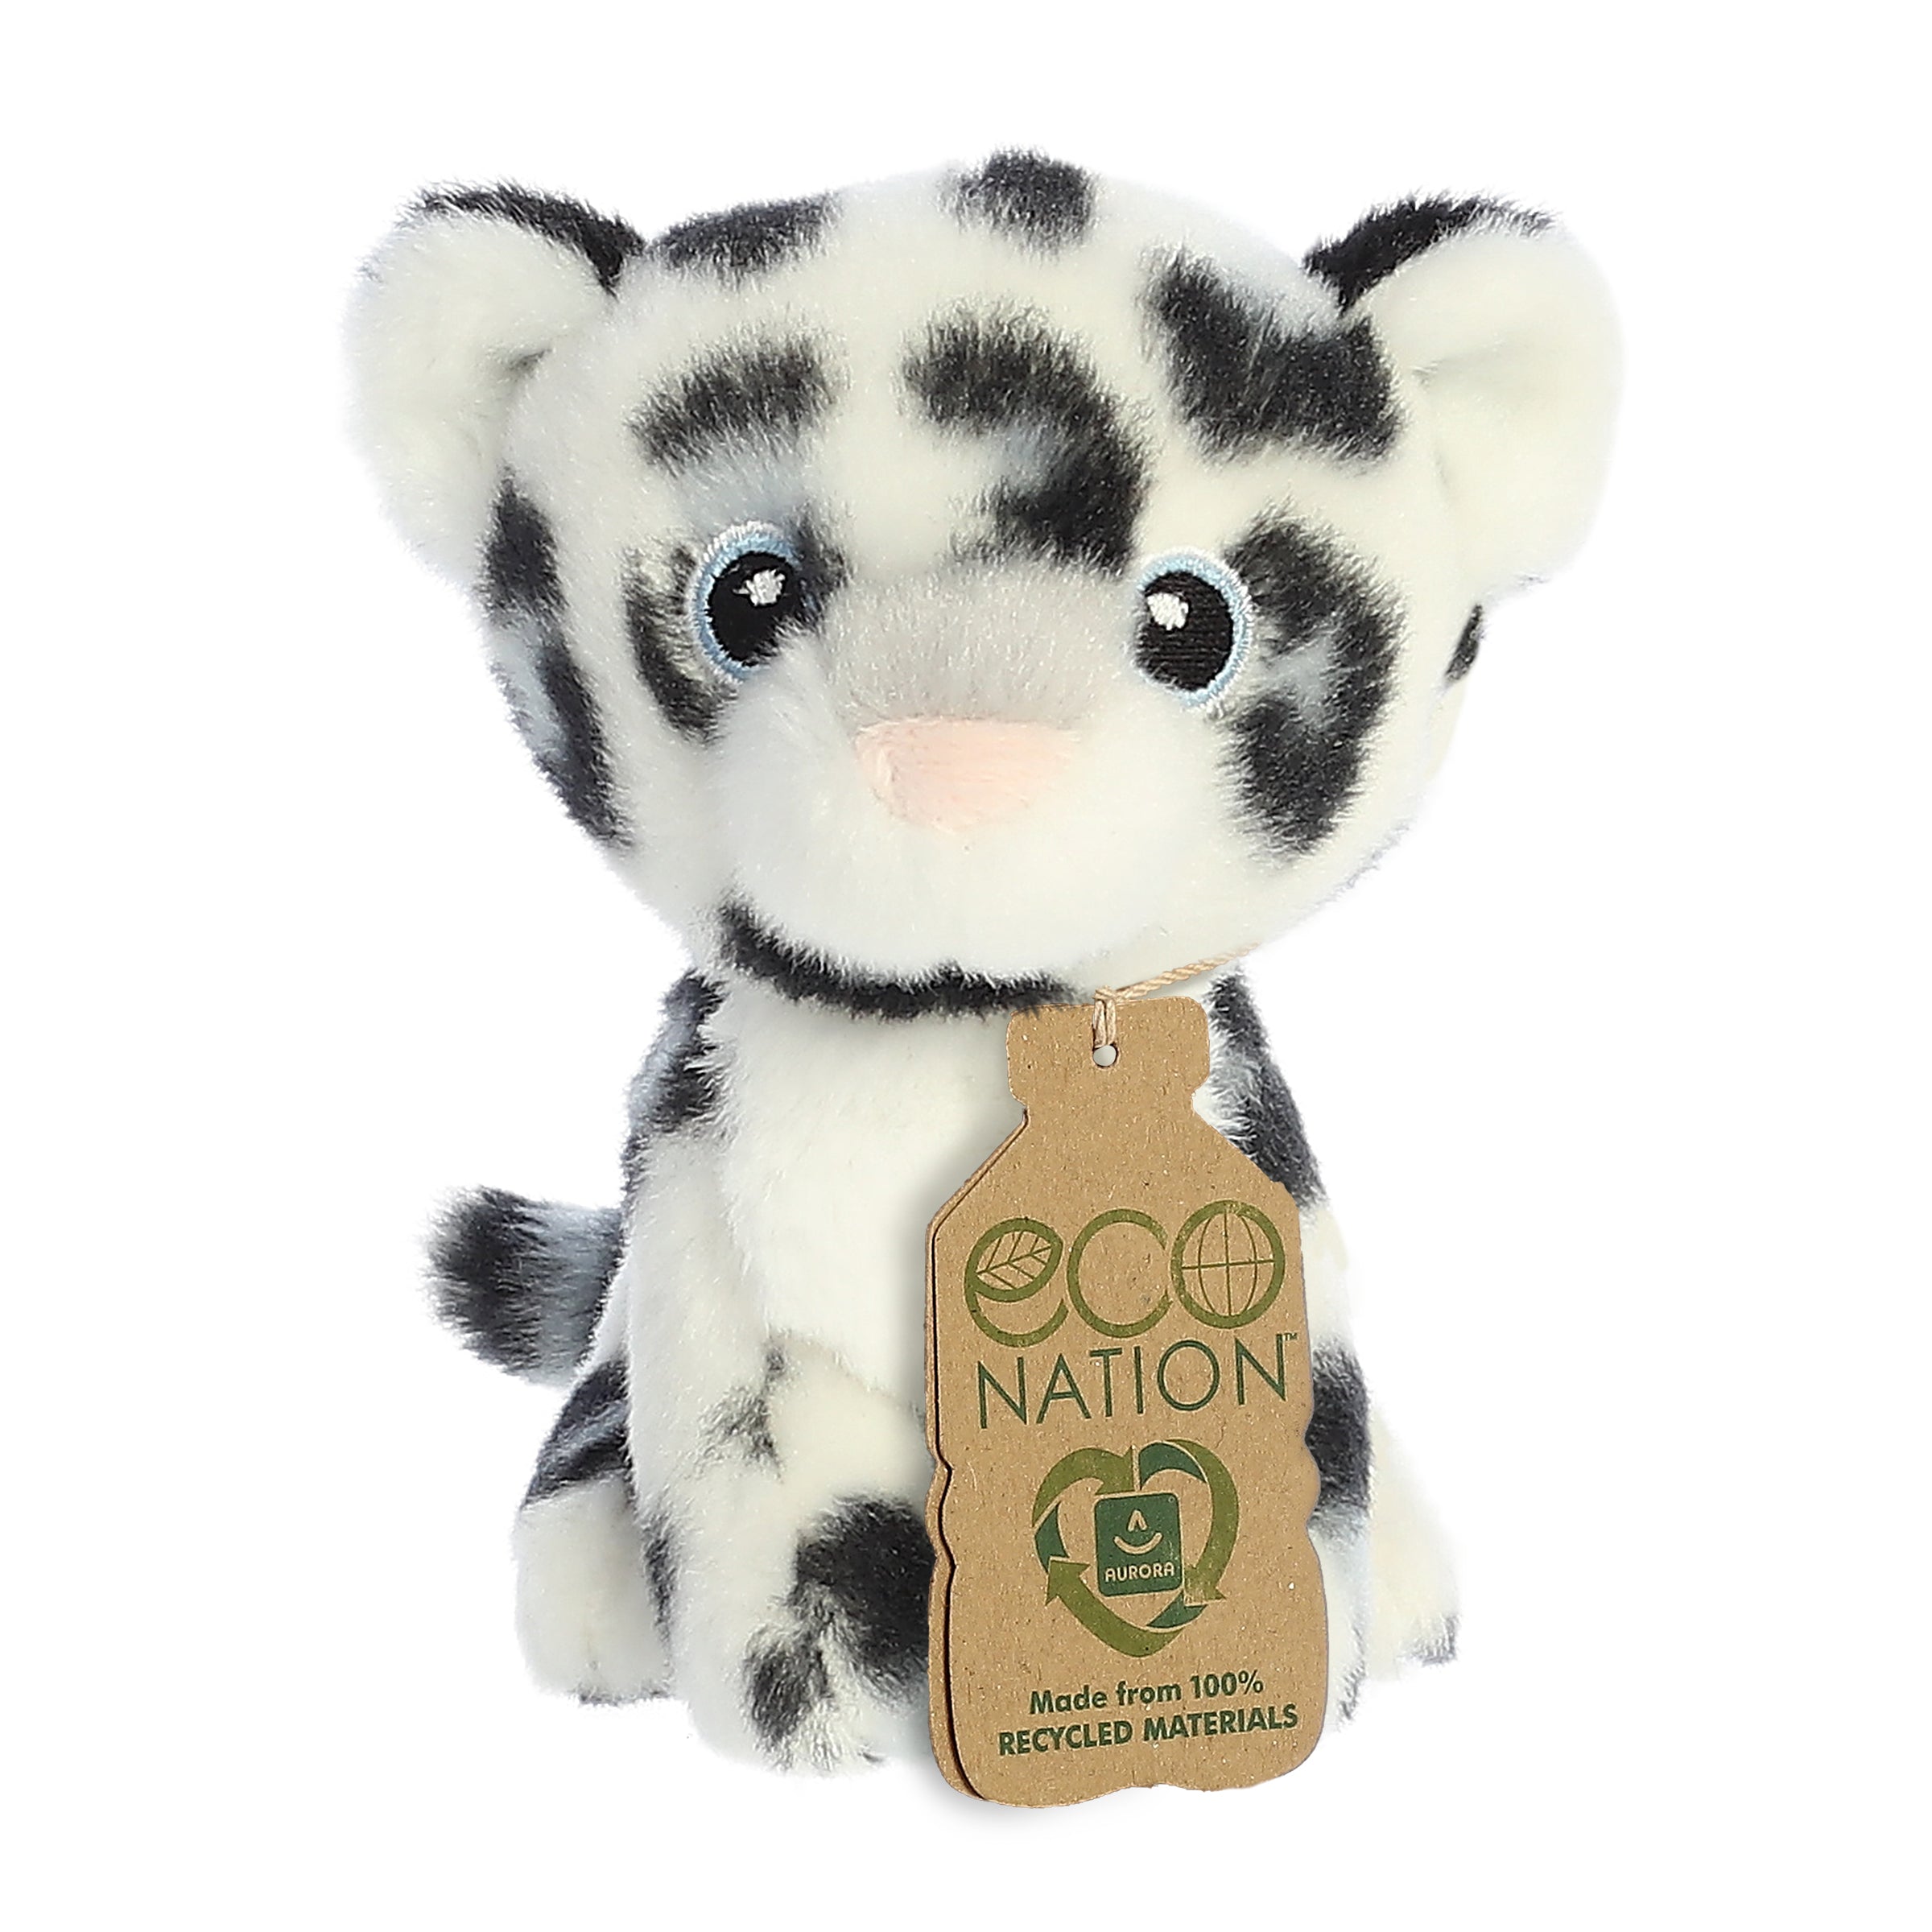 A delightful snow leopard plush with white fur and black spots, and an eco-nation tag around its neck.